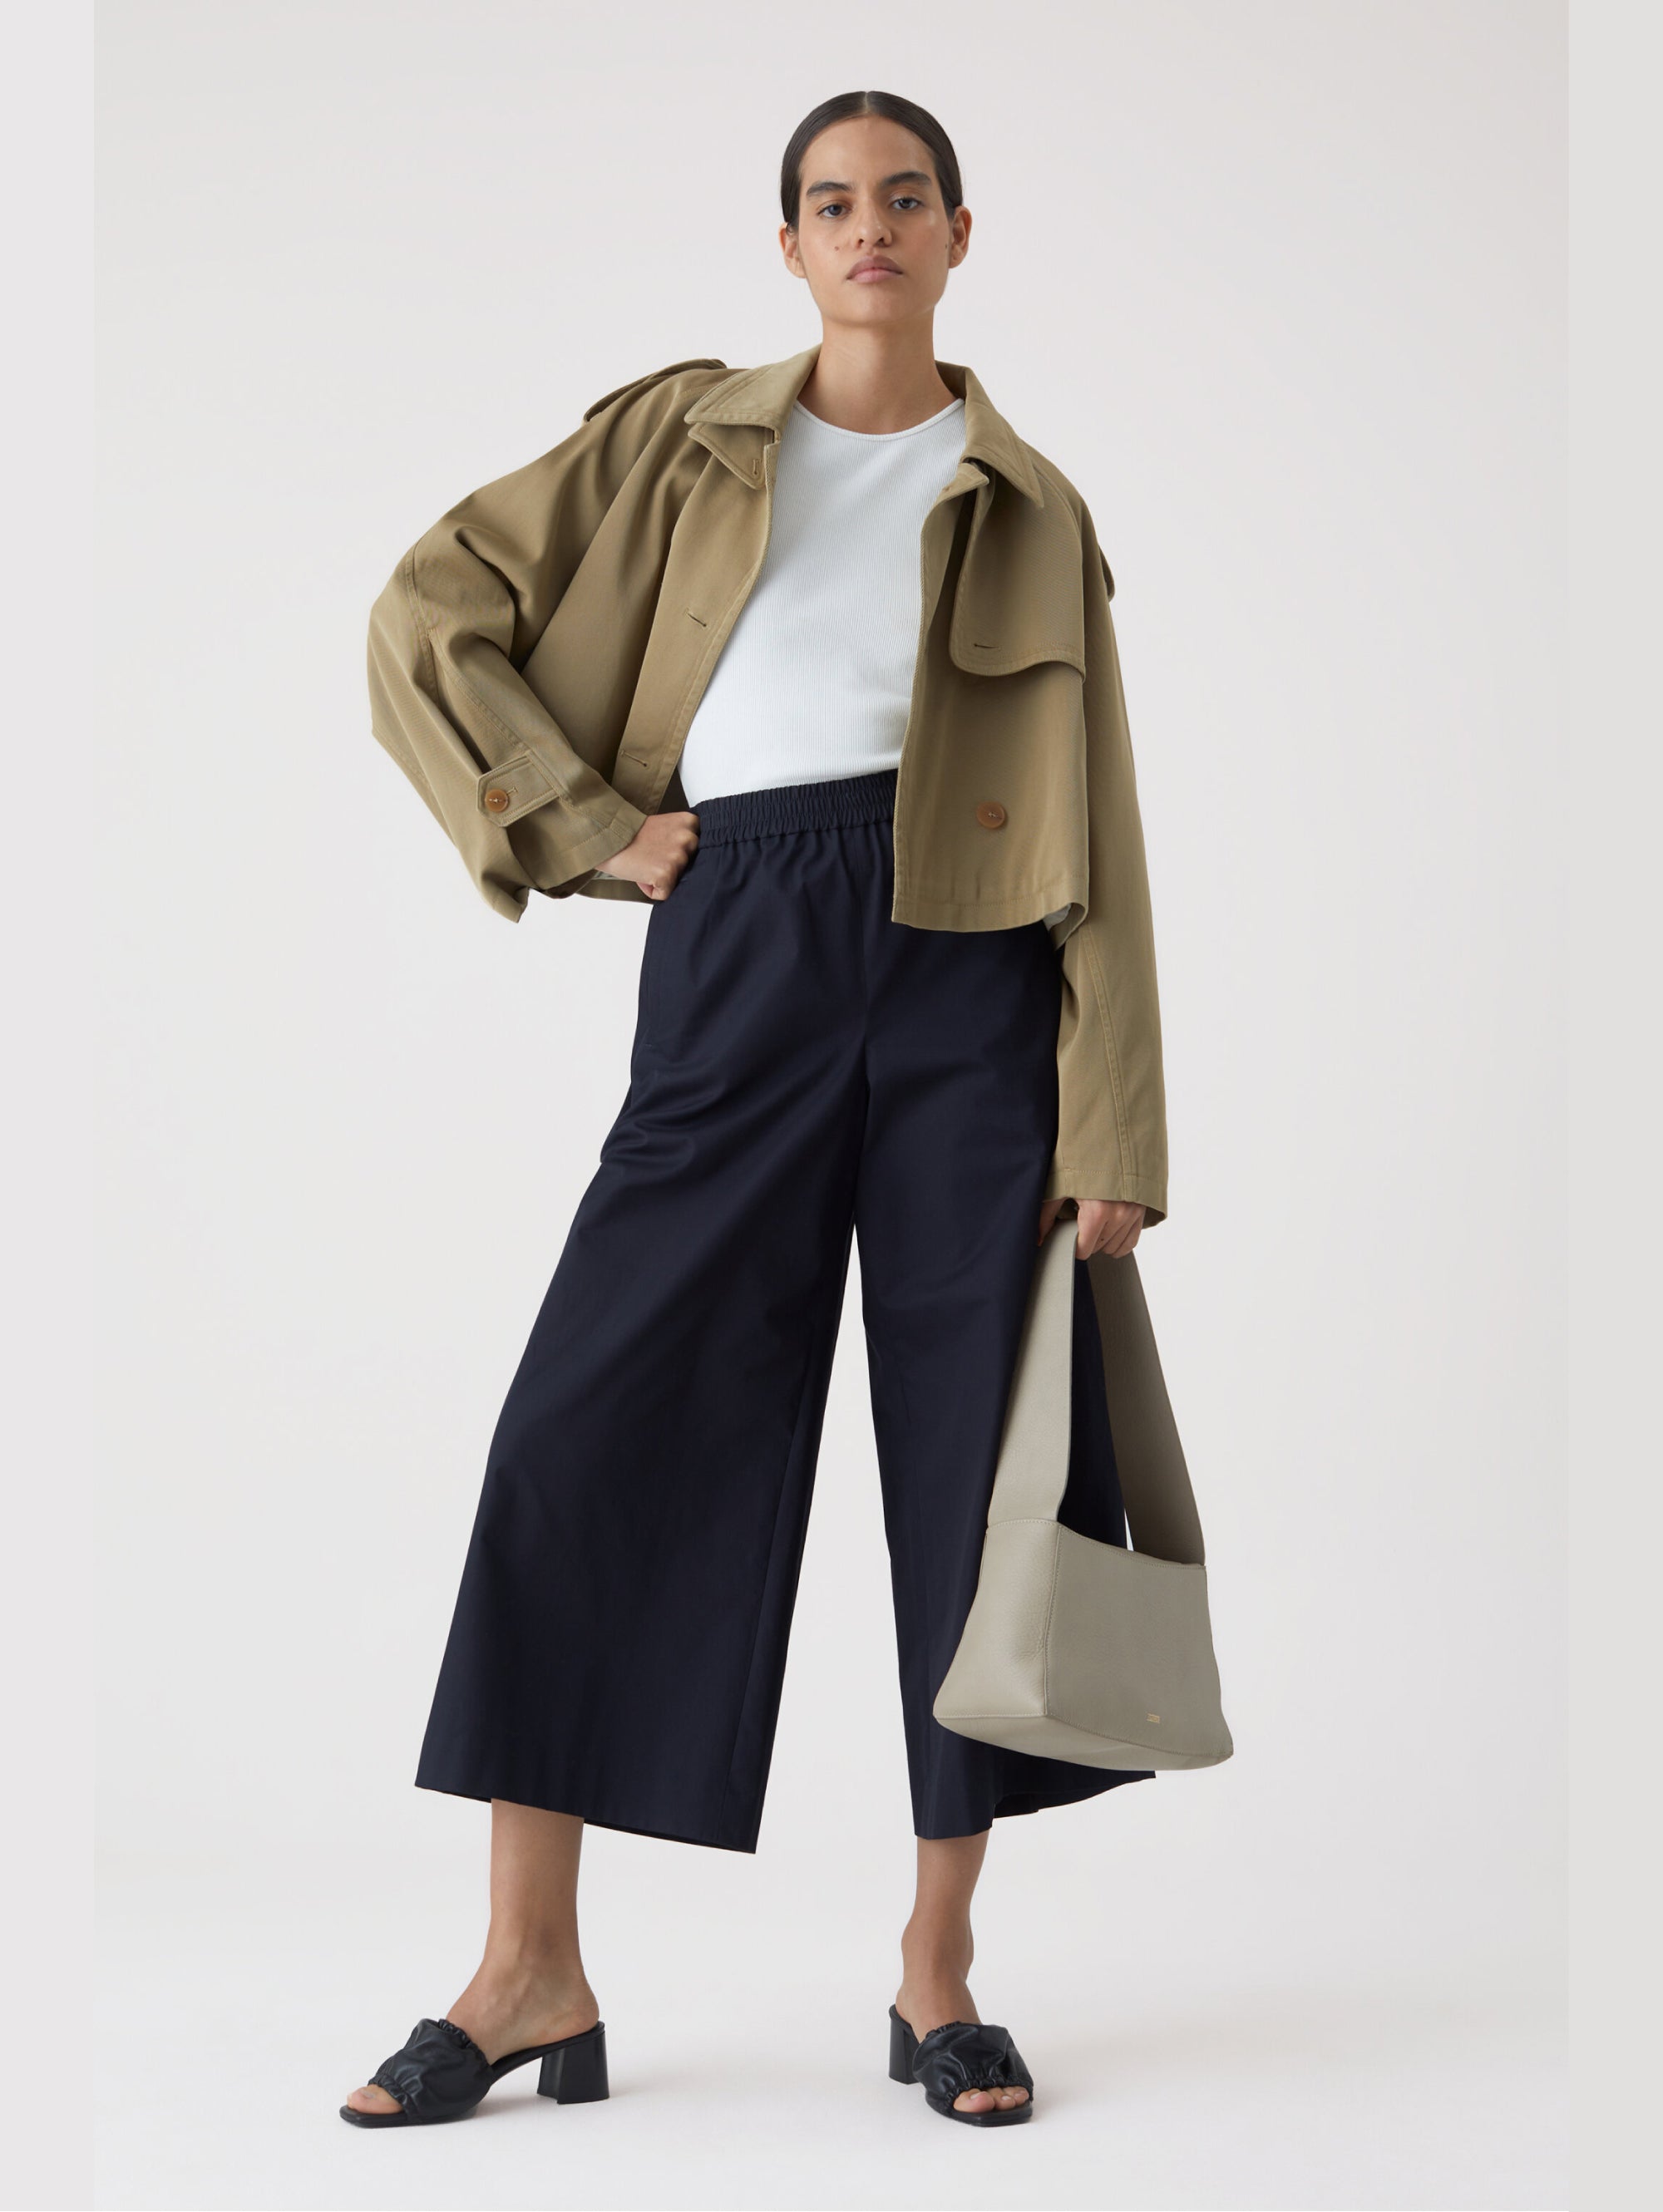 Cropped Pants in Blue Cotton Twill